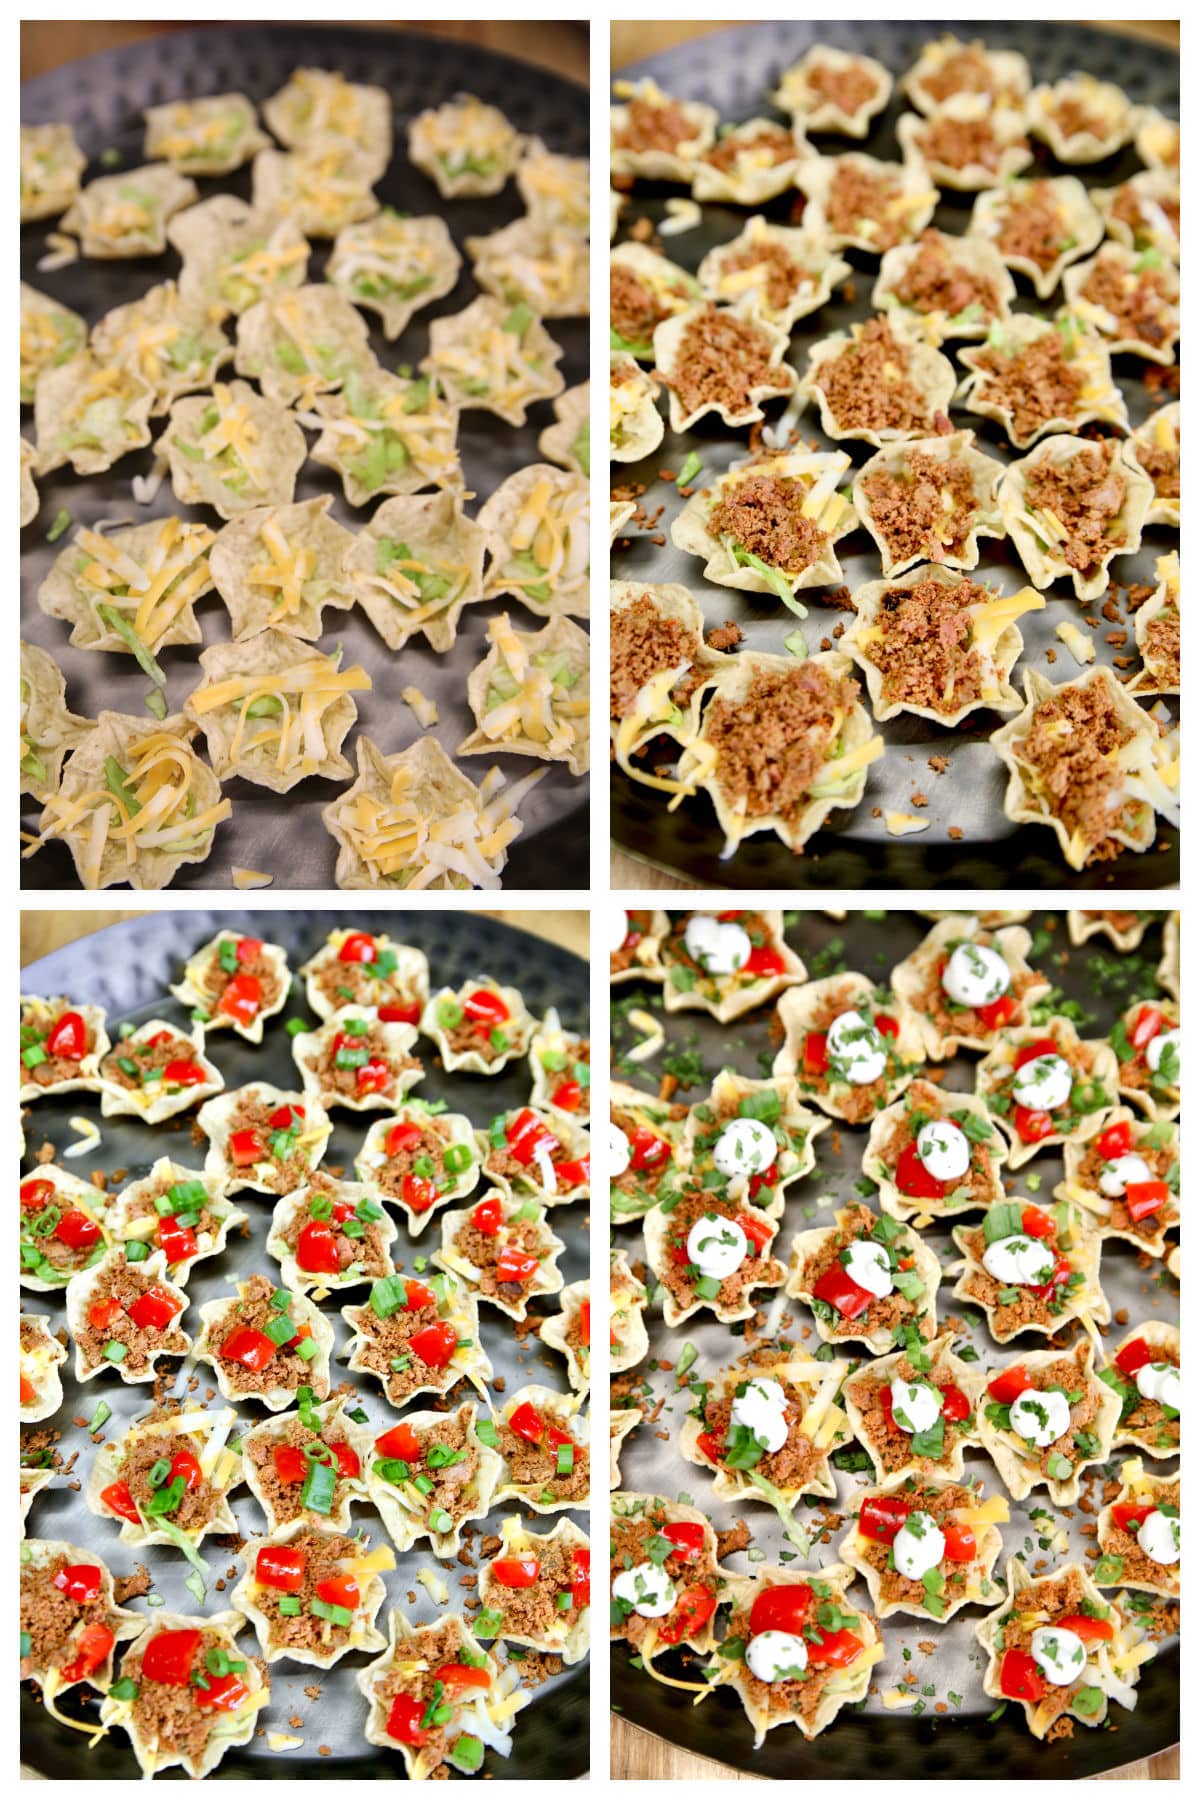 Collage making taco bites with Tostitos scoops, taco meat, cheese, toppings.